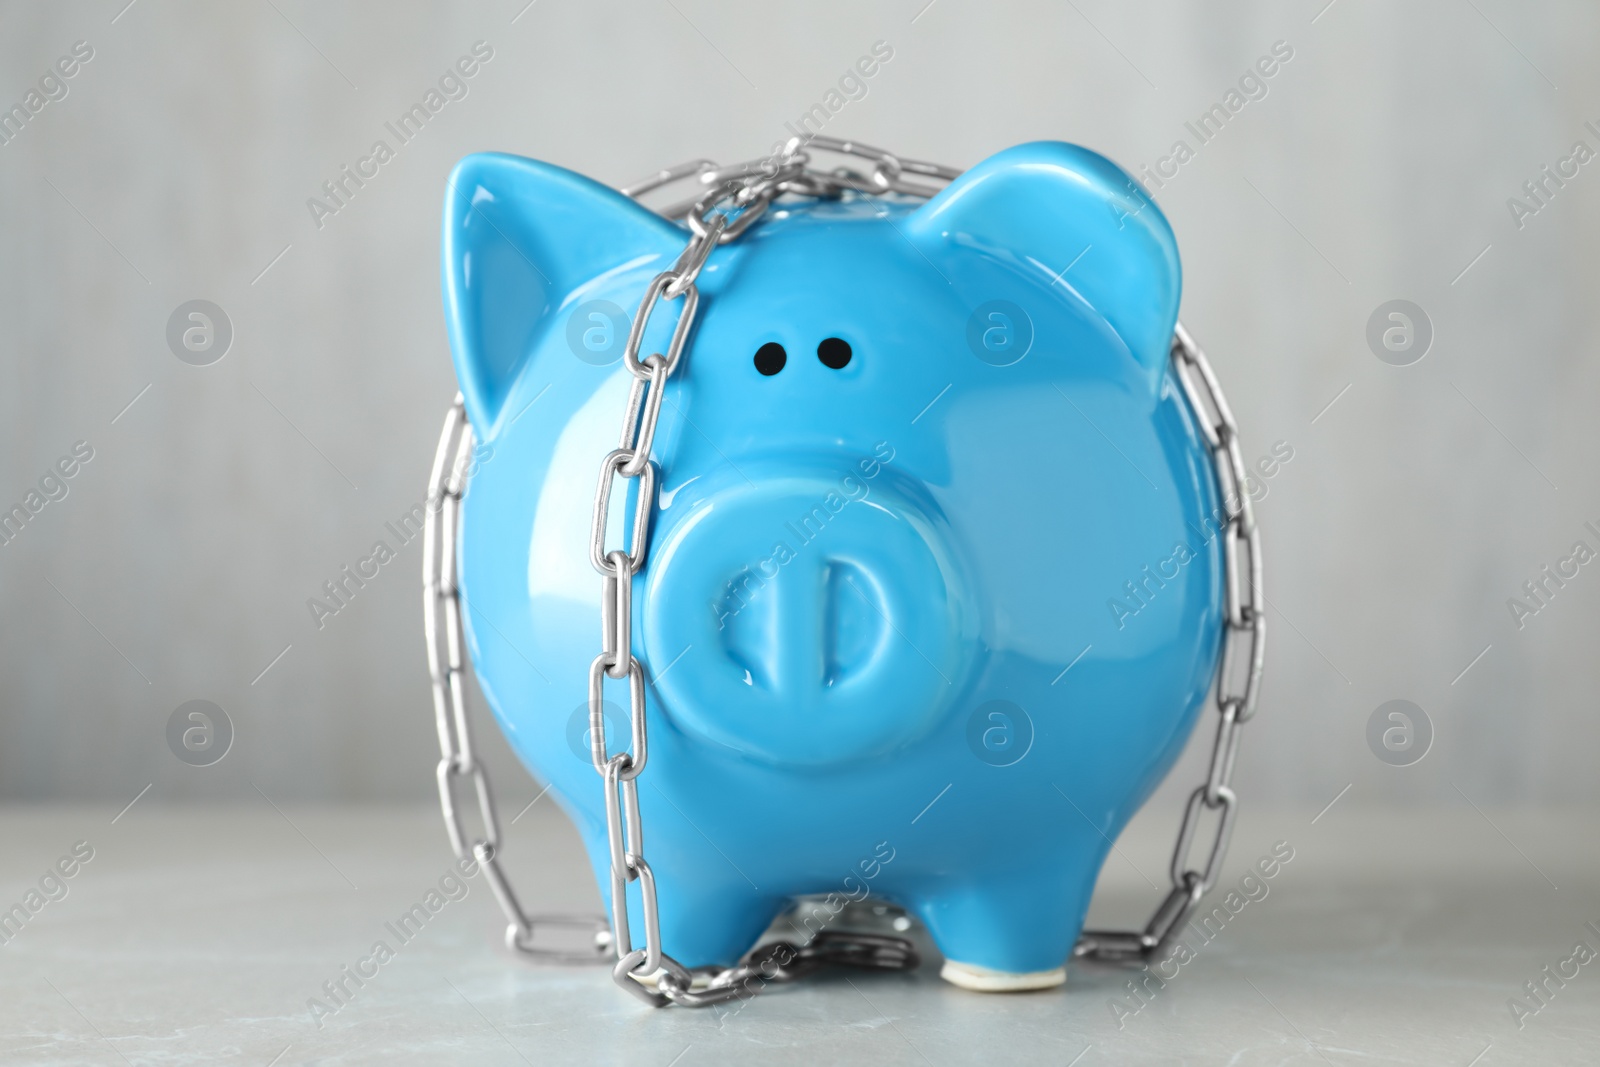 Photo of Piggy bank with steel chain on grey marble table. Money safety concept